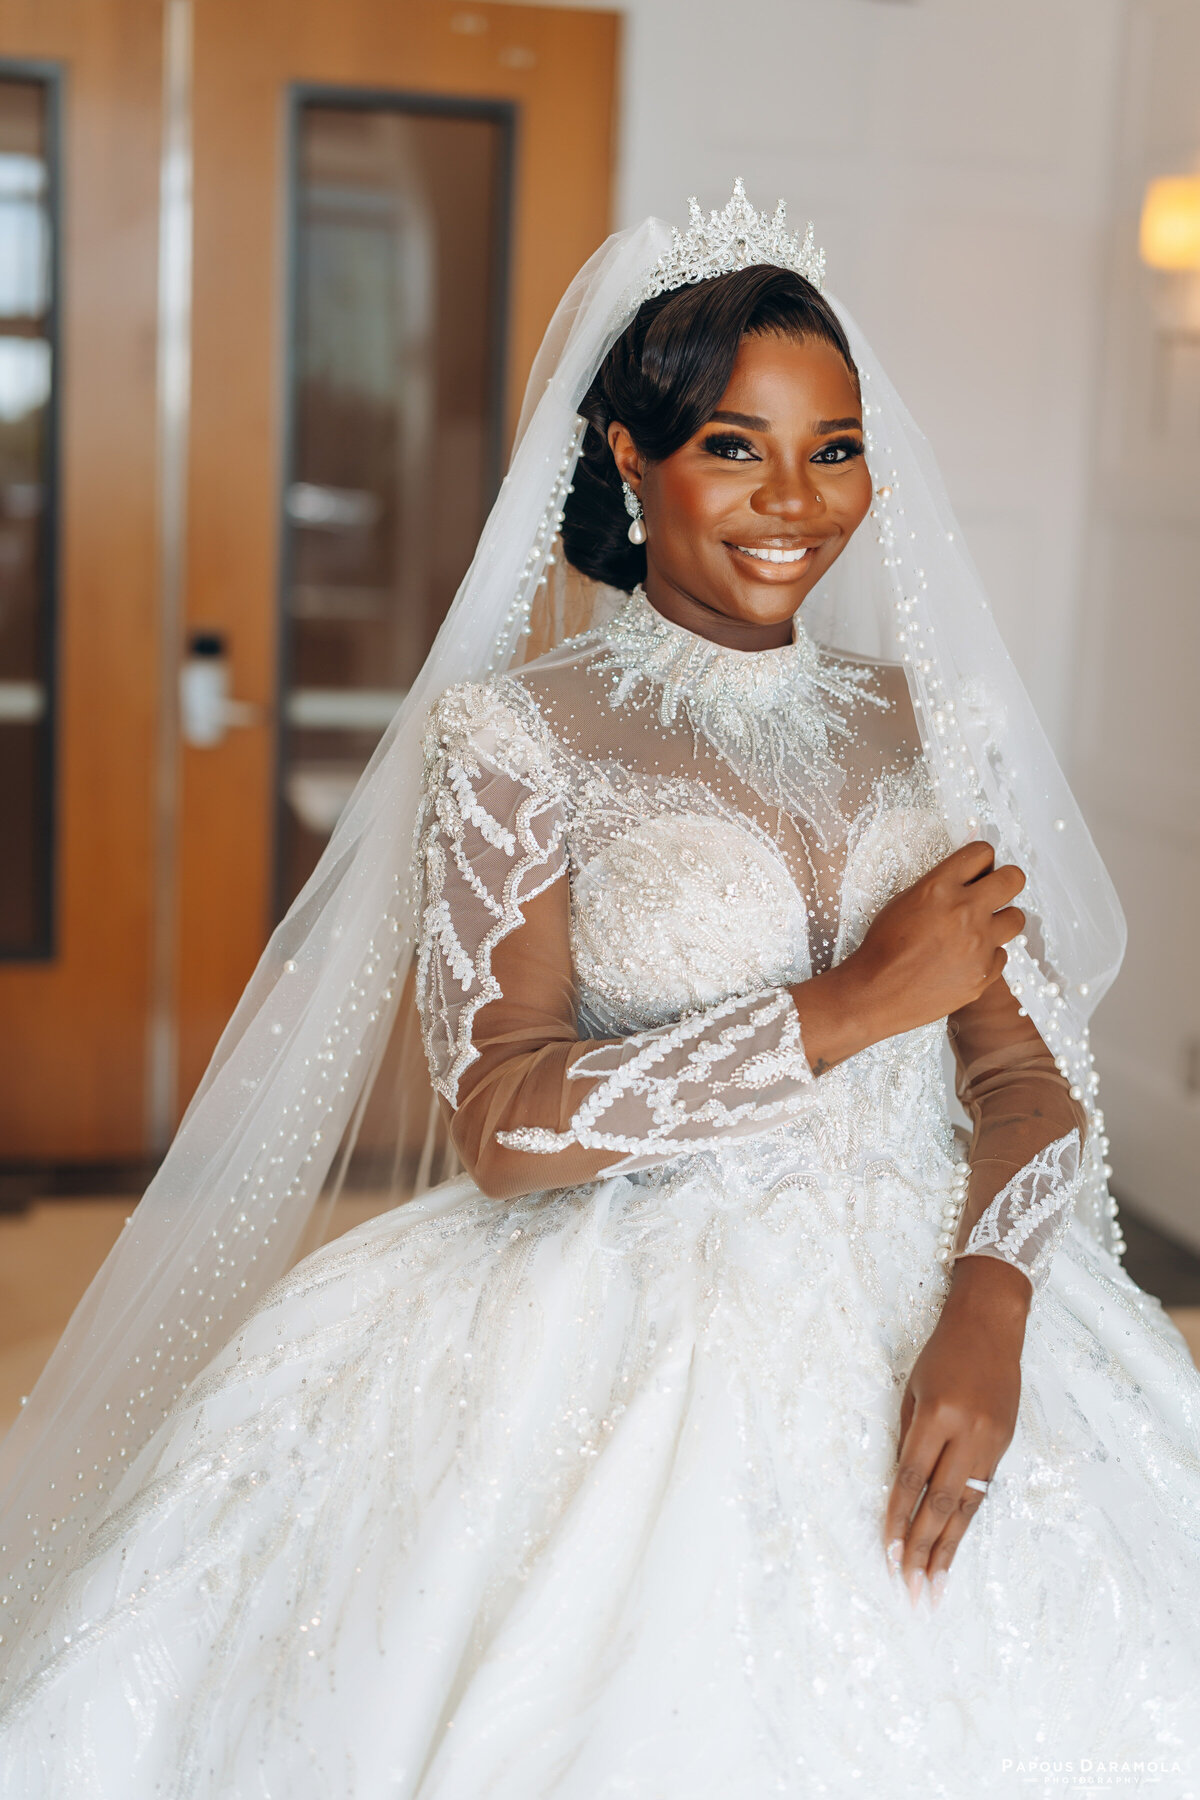 Abigail and Abije Oruka Events Papouse photographer Wedding event planners Toronto planner African Nigerian Eyitayo Dada Dara Ayoola outdoor ceremony floral princess ballgown rolls royce groom suit potraits  paradise banquet hall vaughn 103